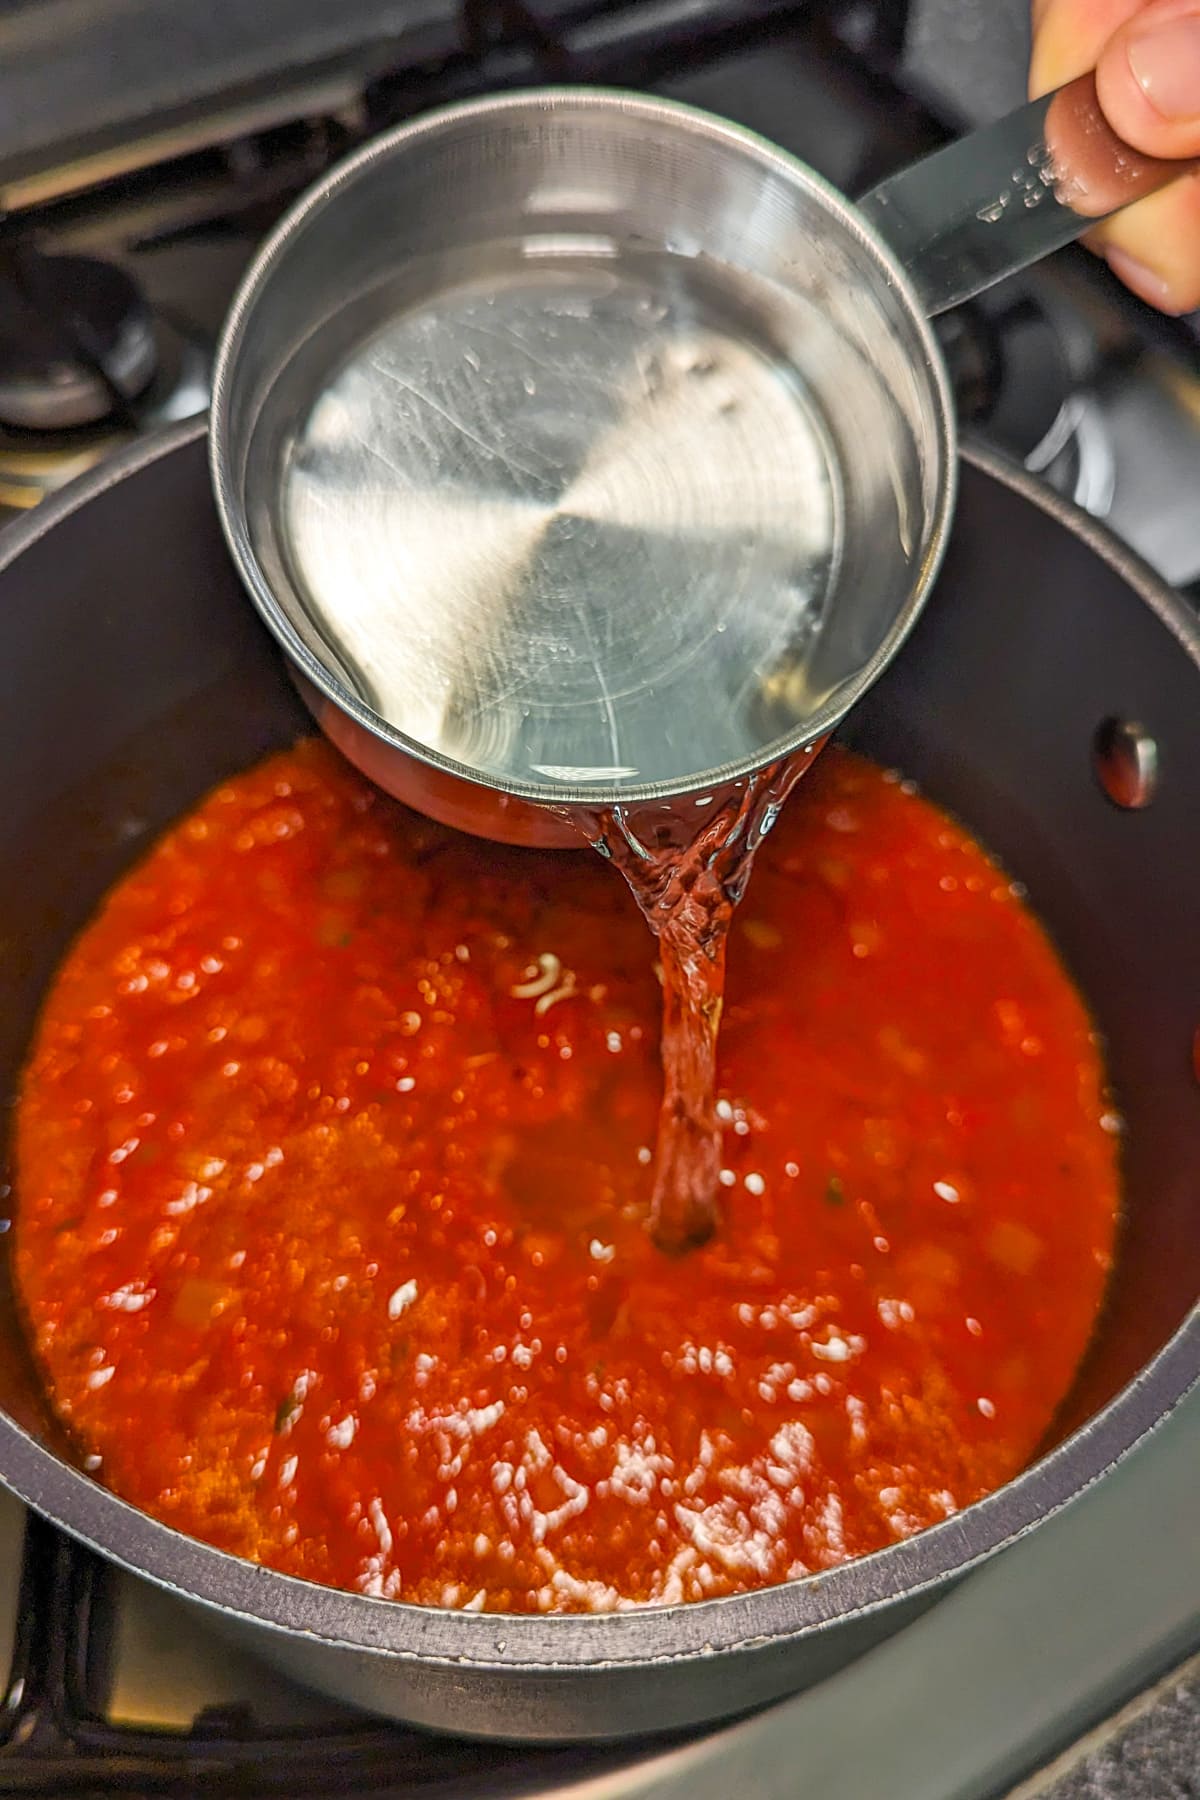 Pouring water over a tomato soup in a pan on the stove.